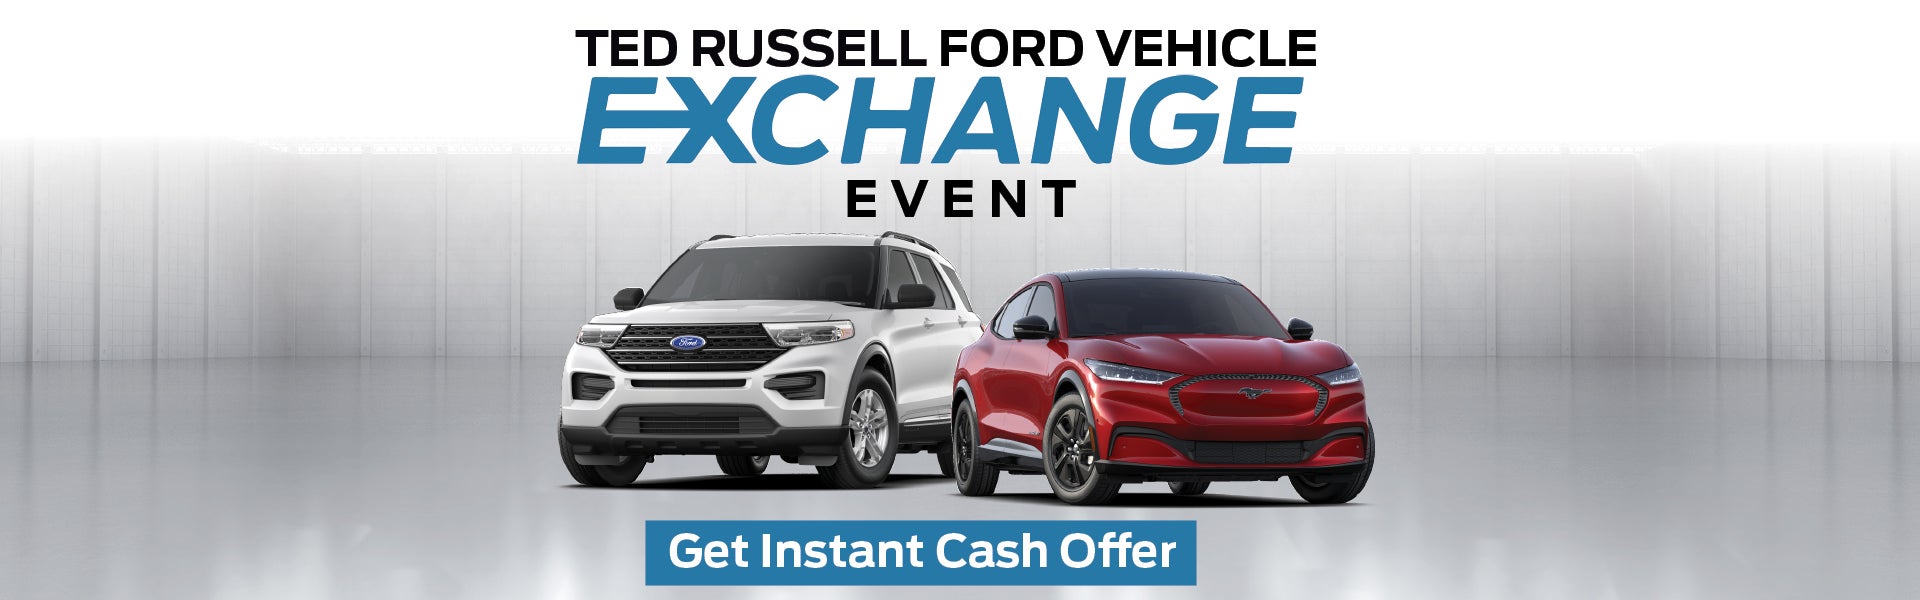 Ted Russell Ford Summer Vehicle Exchange Event